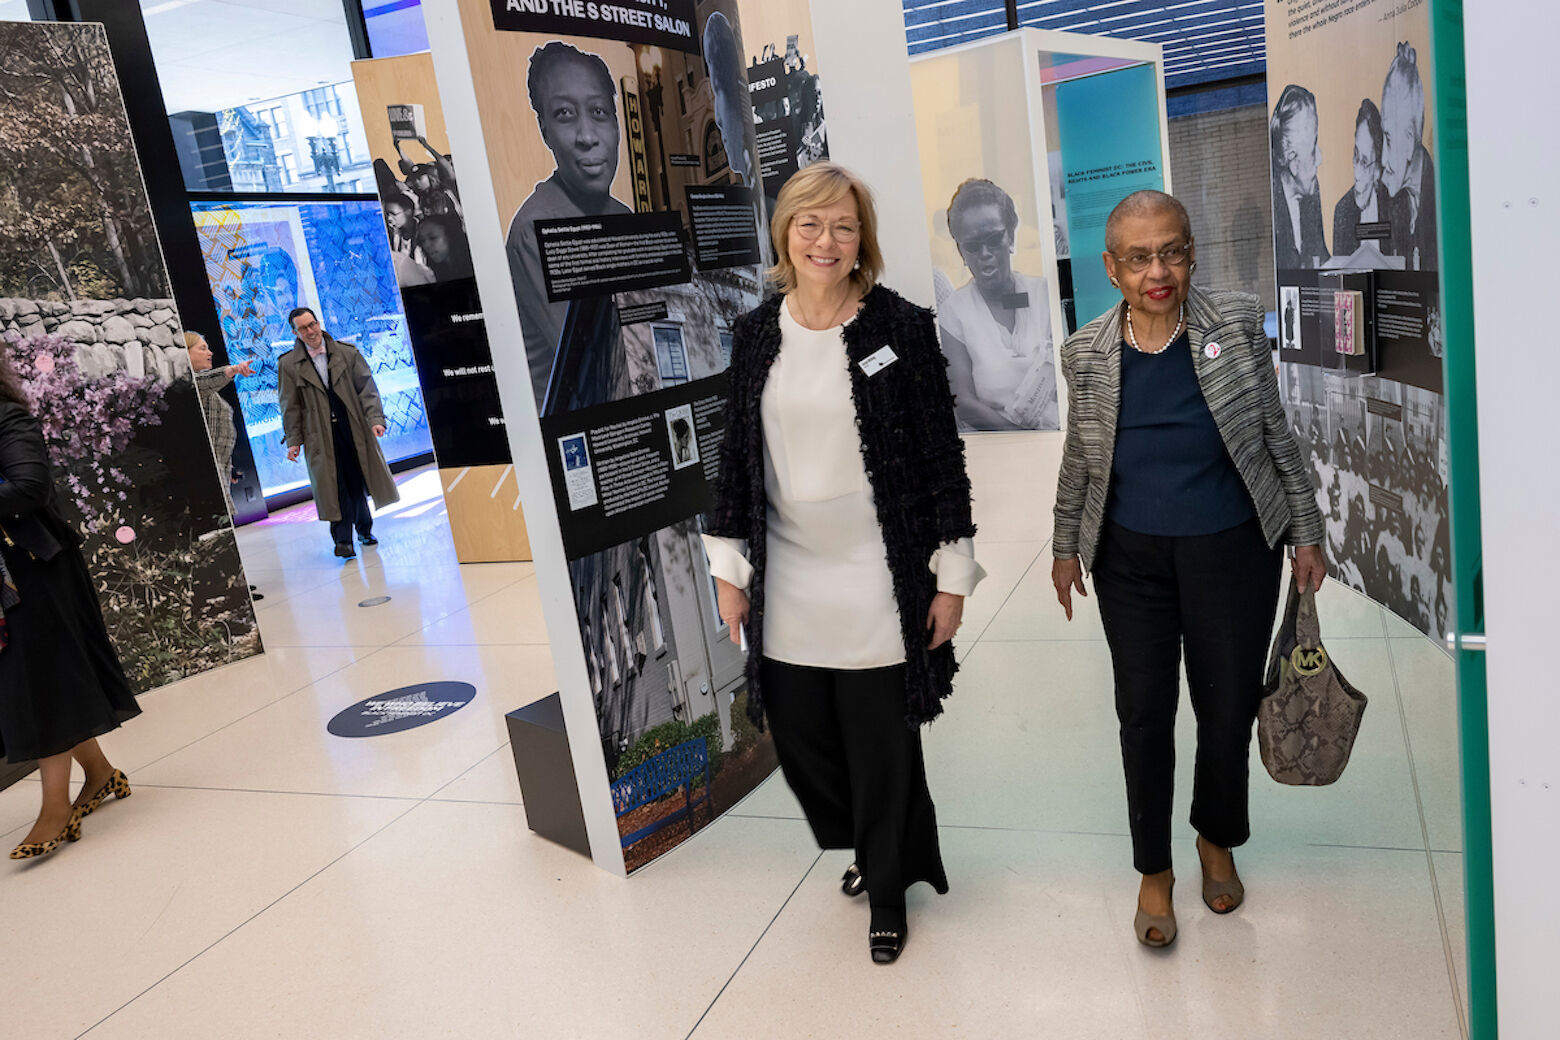 Susan Whiting, National Women’s History Museum Board Chair, and Rep. Eleanor Holmes Norton explore the exhibit. (Lisa Helfert/National Women's History Museum)